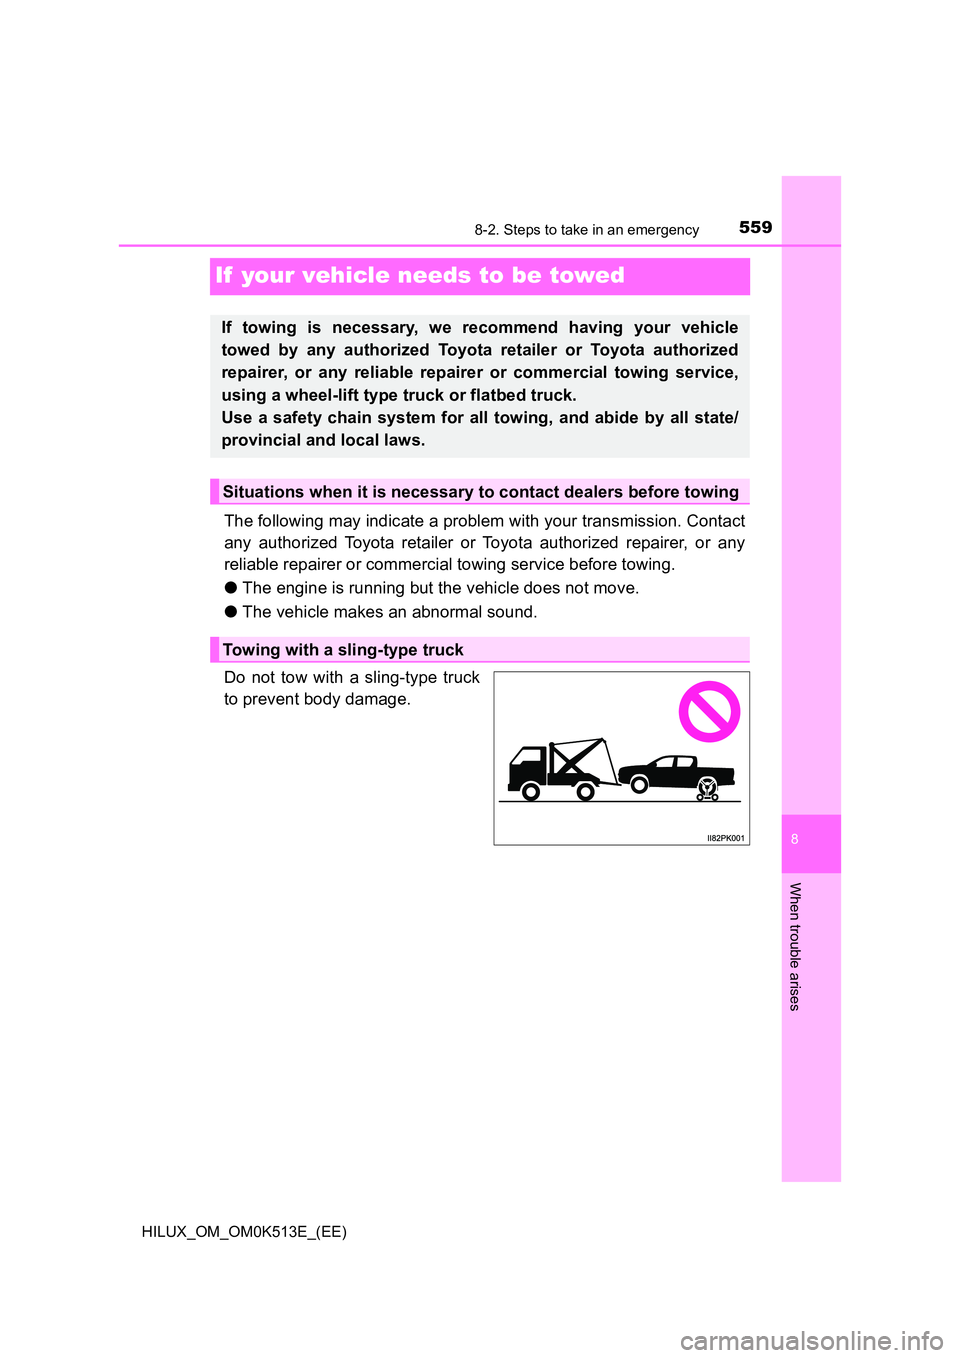 TOYOTA HILUX 2022  Owners Manual 5598-2. Steps to take in an emergency
HILUX_OM_OM0K513E_(EE)
8
When trouble arises
If  your vehicle needs to be towed
The following may indicate a problem with your transmission. Contact 
any authoriz